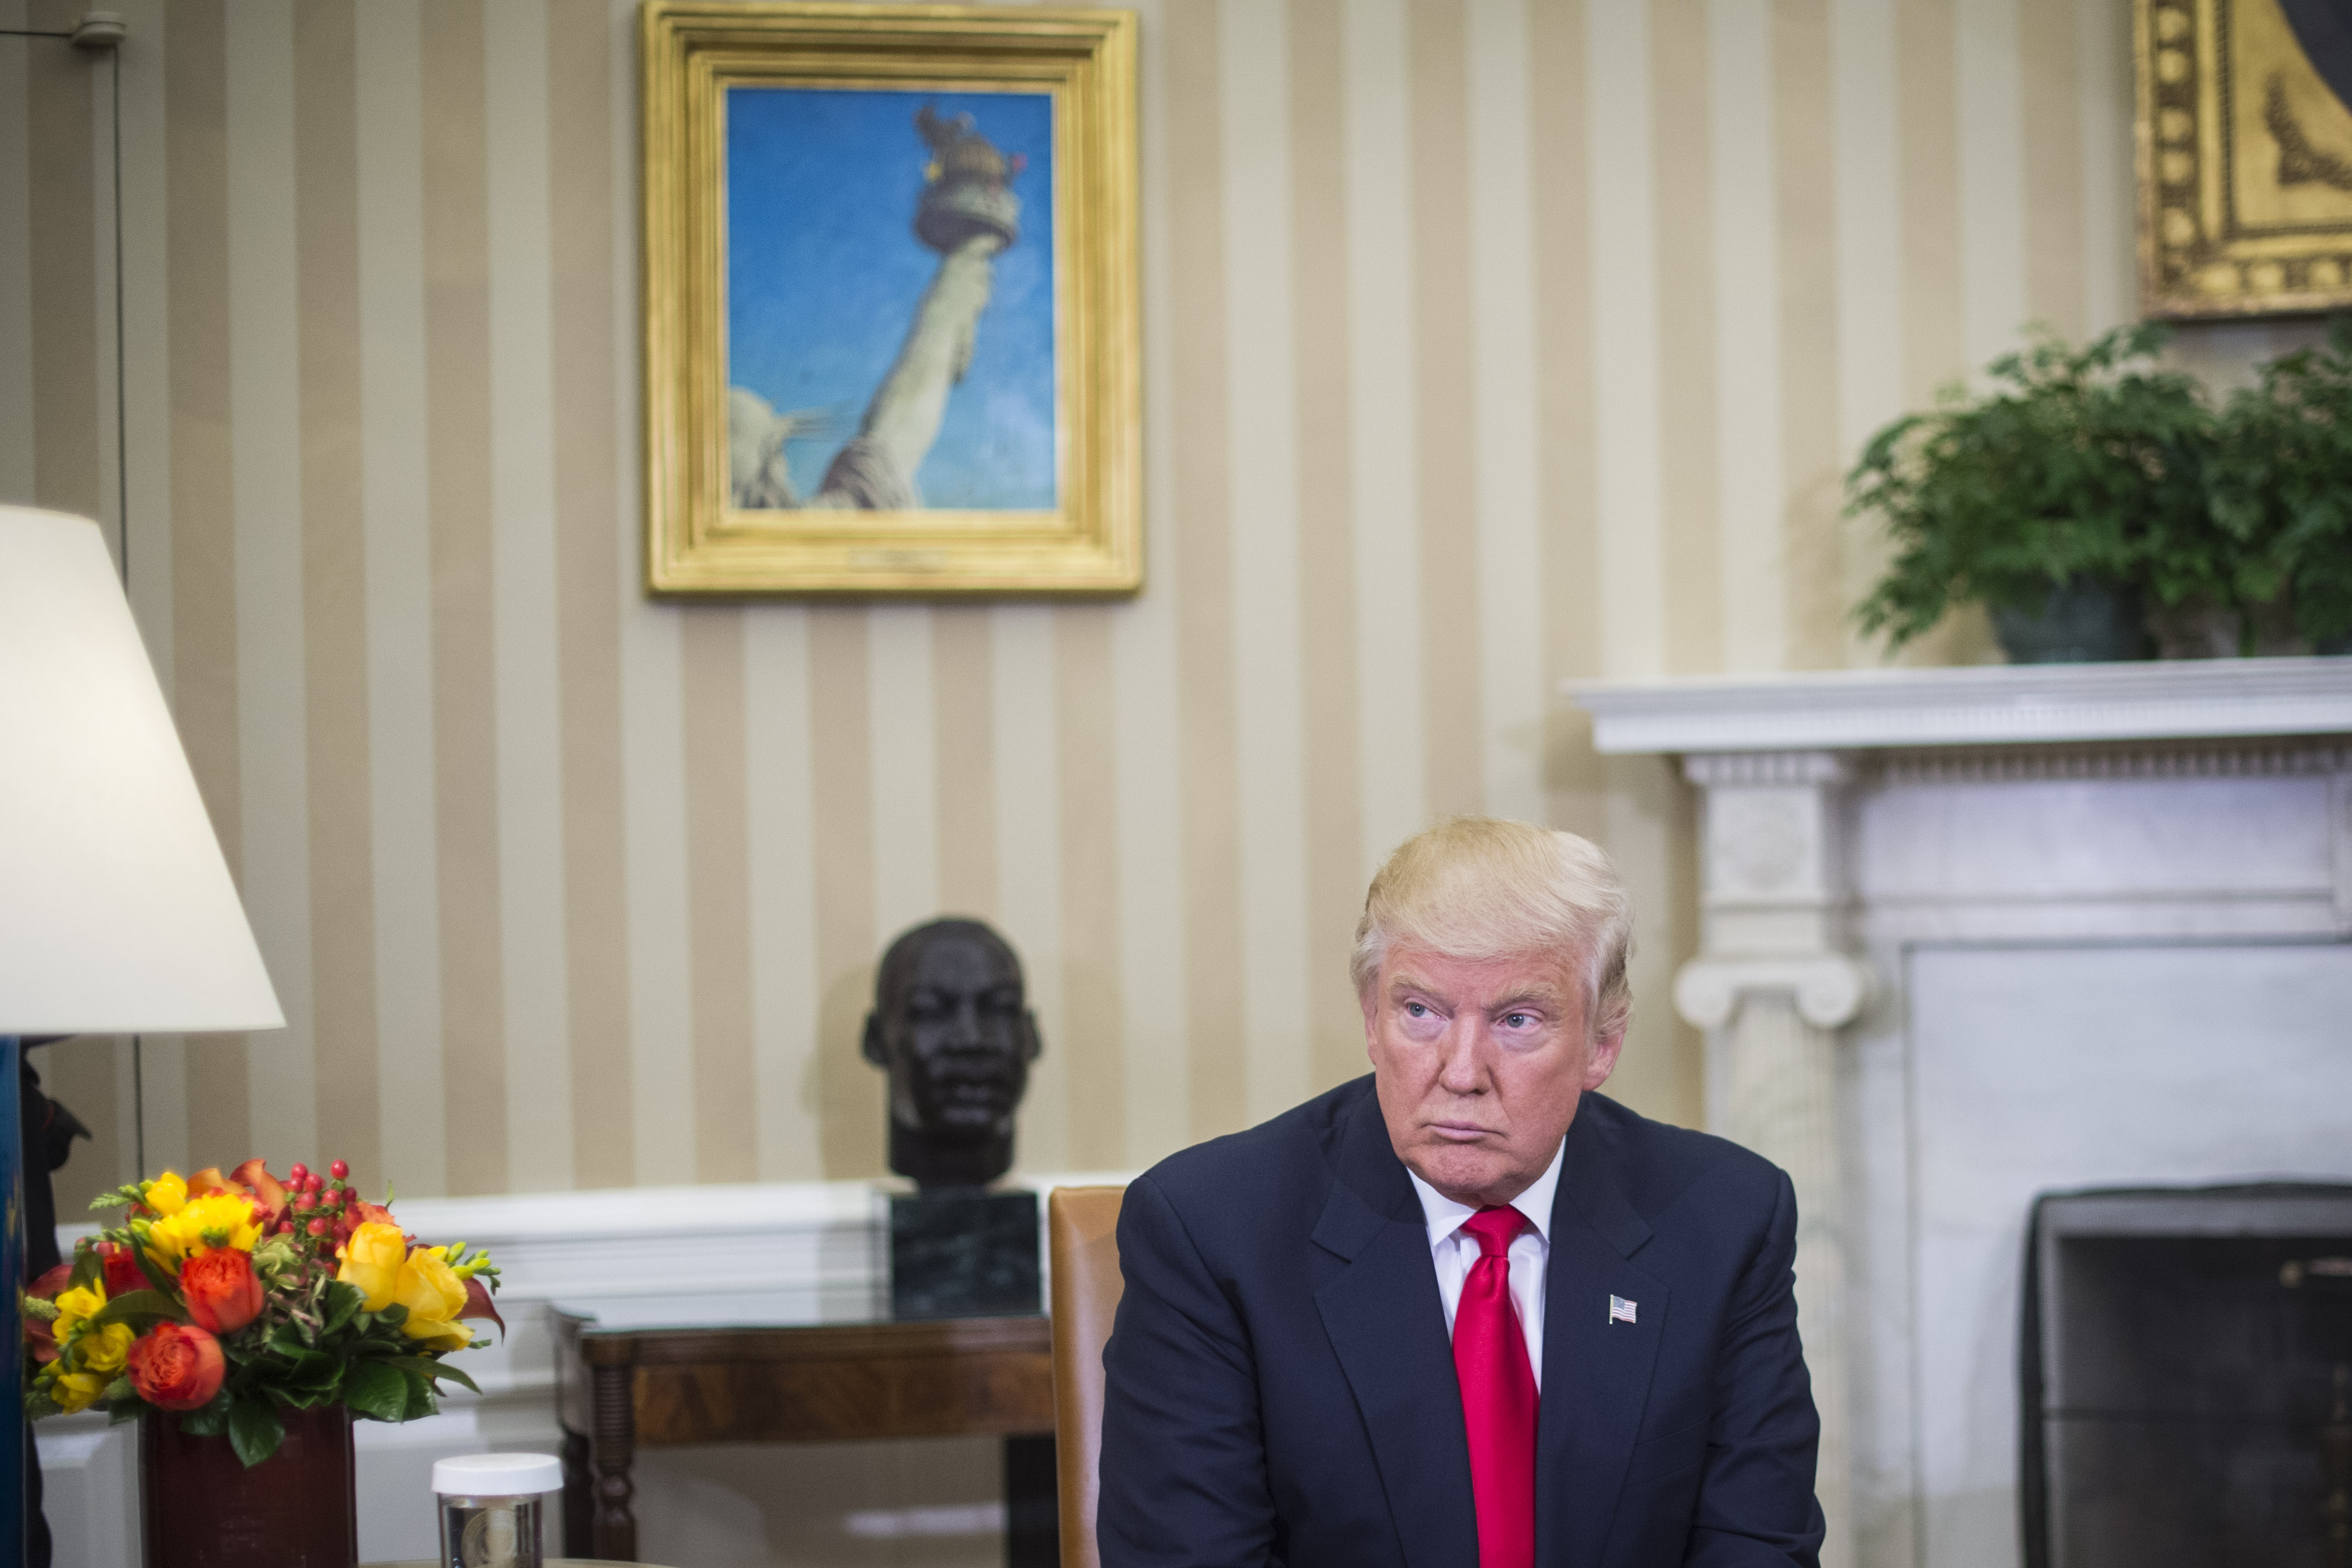 President-elect Donald Trump listens as President Barack Obama talks to the media in the Oval Office of the White House in Washington on Nov. 10, 2016.